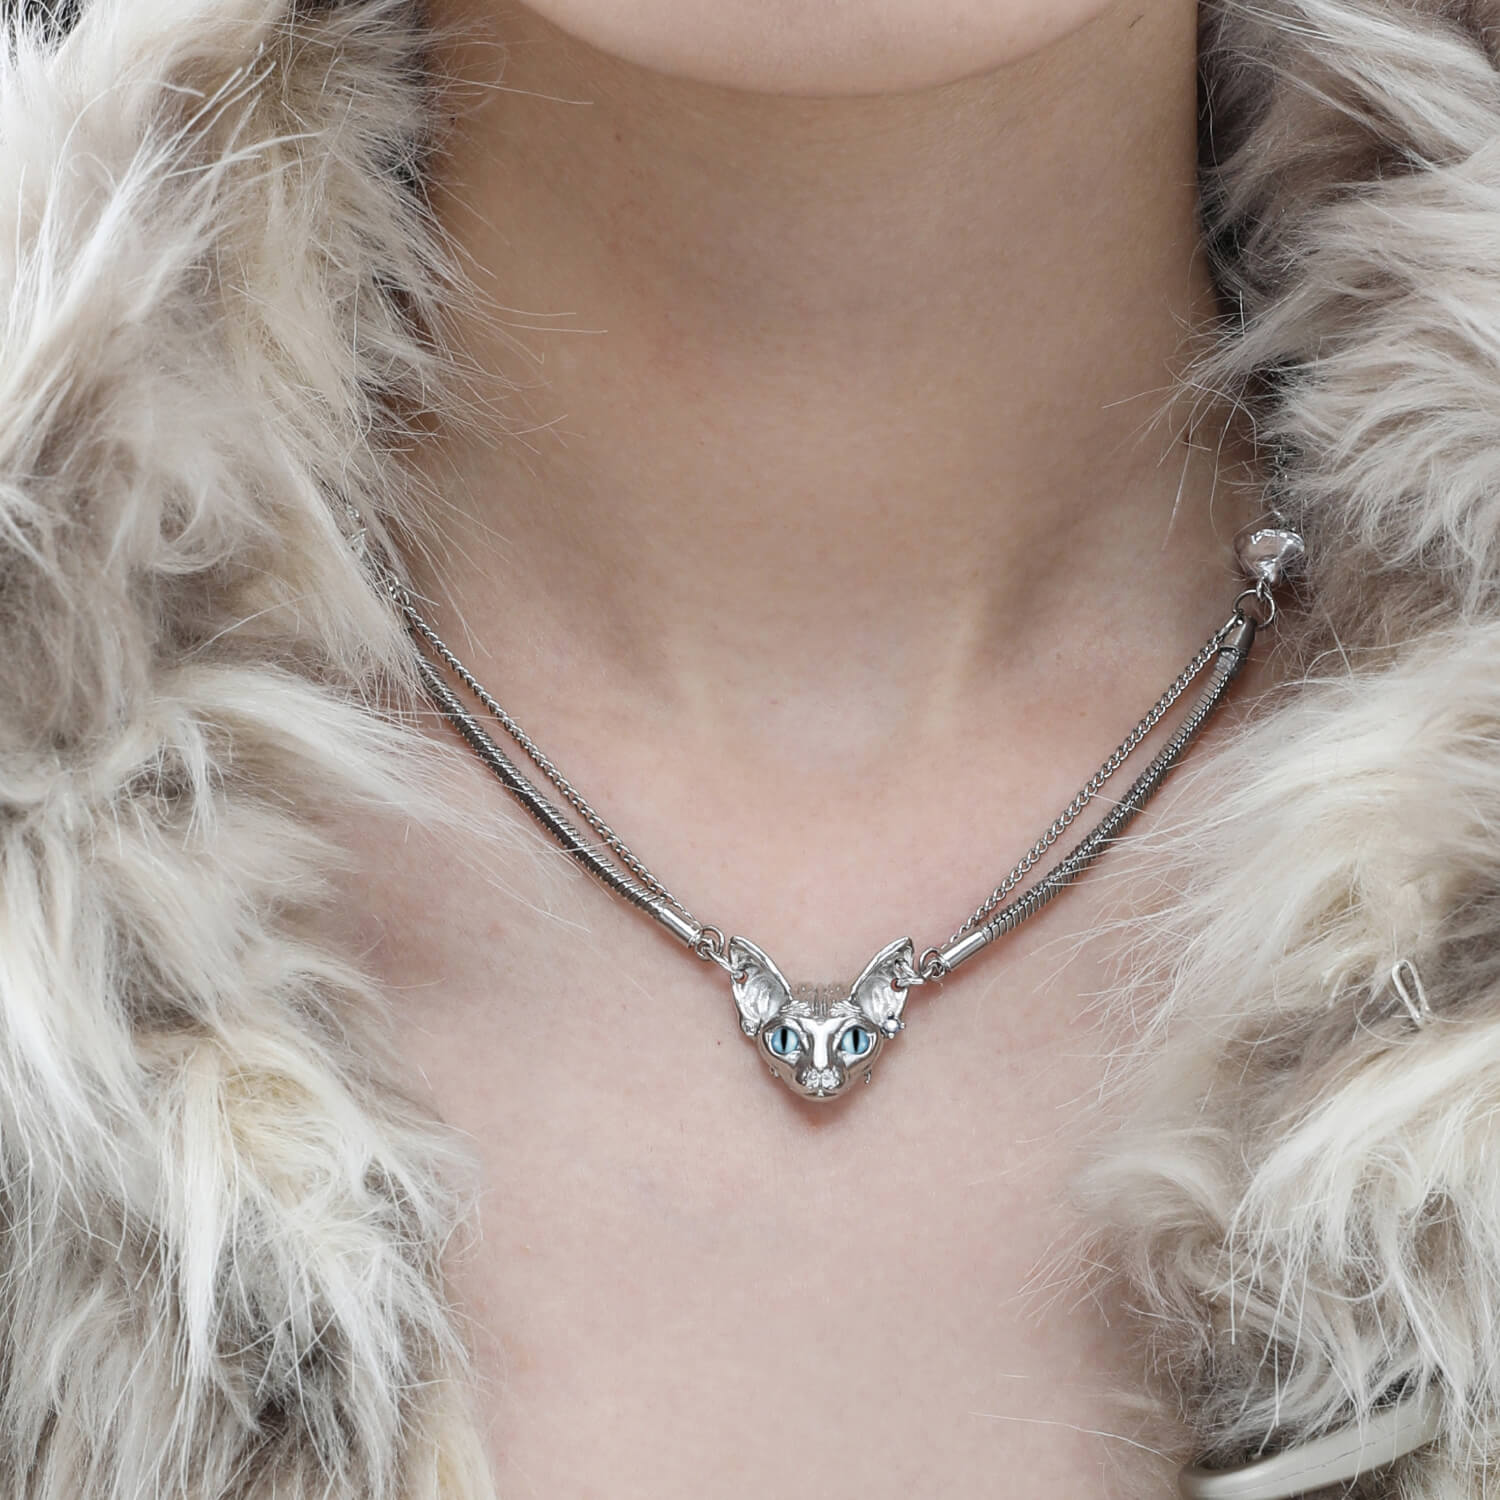 Dark Cat Double Clavicle Chain Genderless Necklace  Buy at Khanie